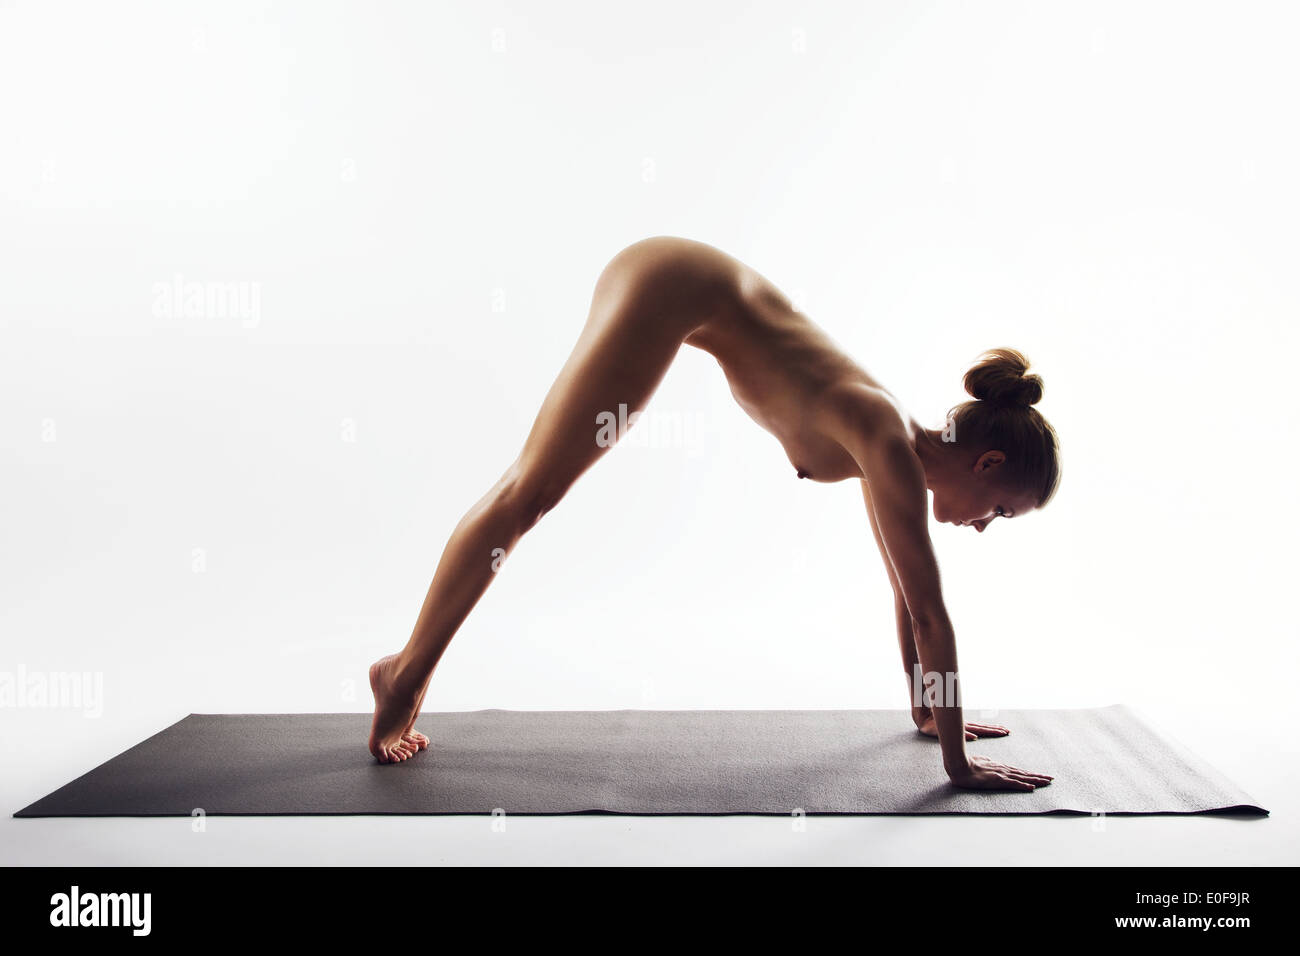 Bare Bodies and Bending: Nude Yoga at Its Finest